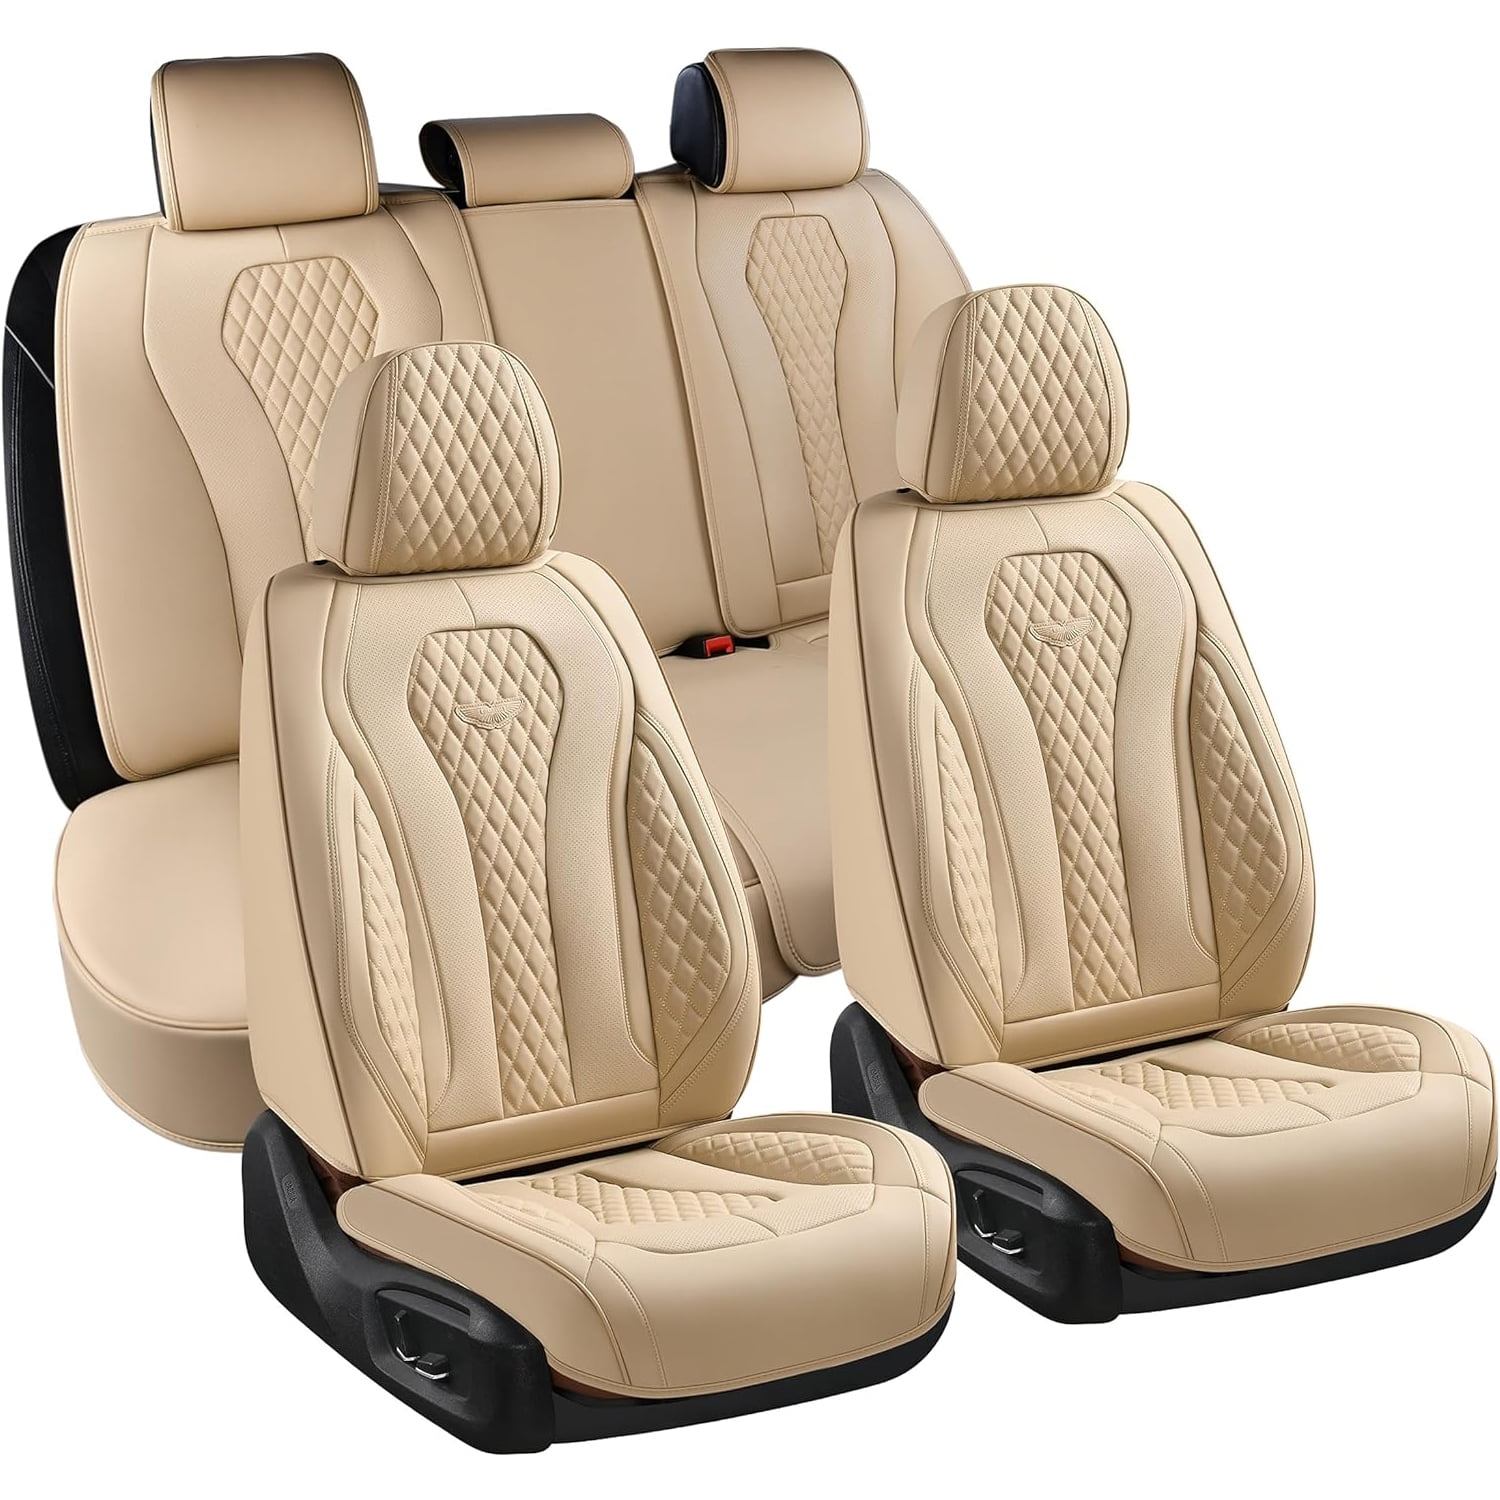 Car Seat Cushion for Leather Seats for Driver. Less Fatigue on Long Trips.  Cool and Dry in the Heat. Summer Seat Pad. Eco Friendly. Beige 